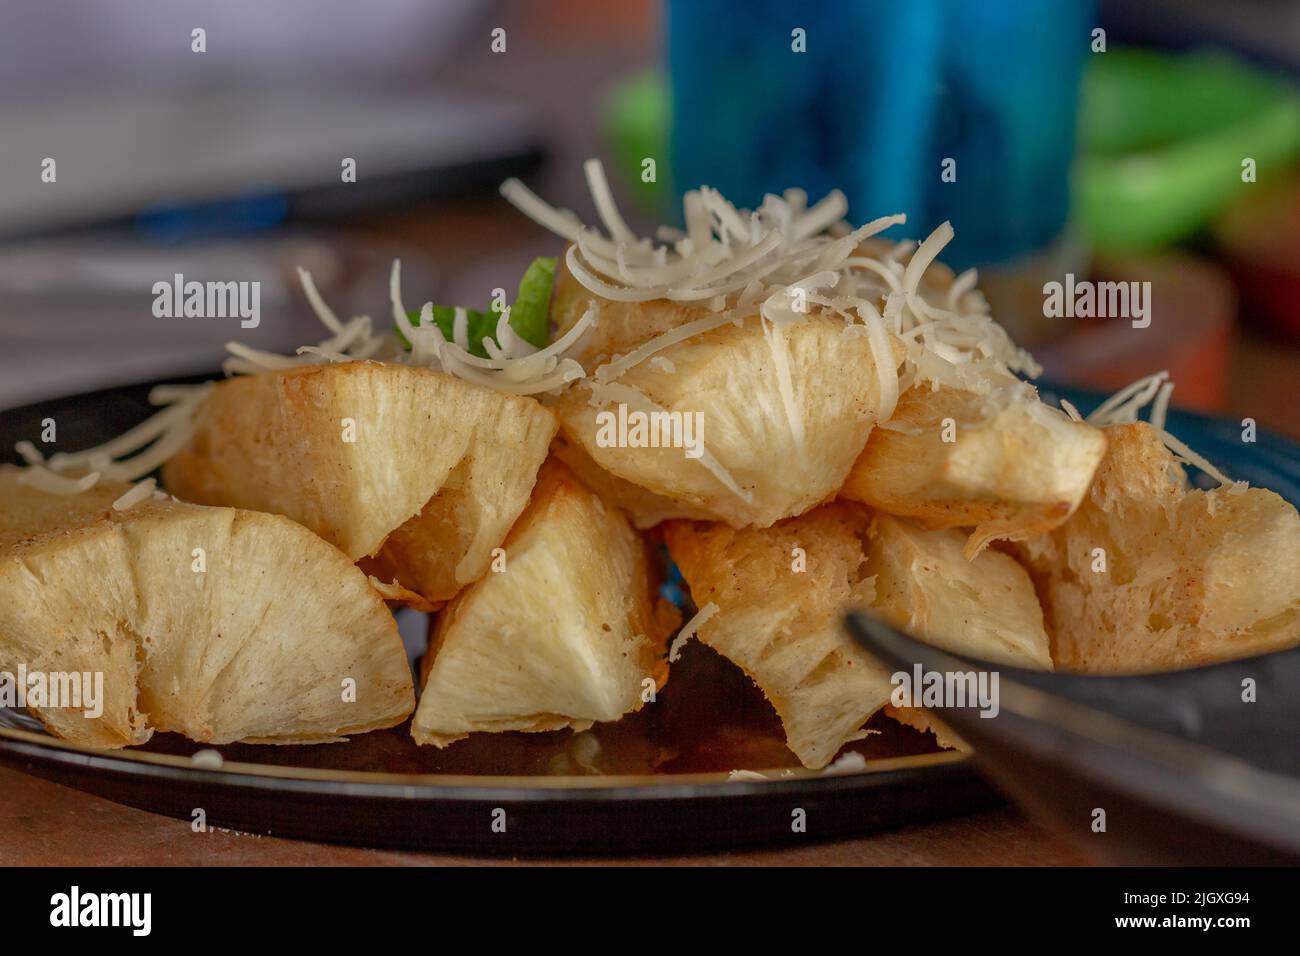 Fried Cassava with cheese sprinkles served on a black ceramic plate, a snack for lunch Stock Photo